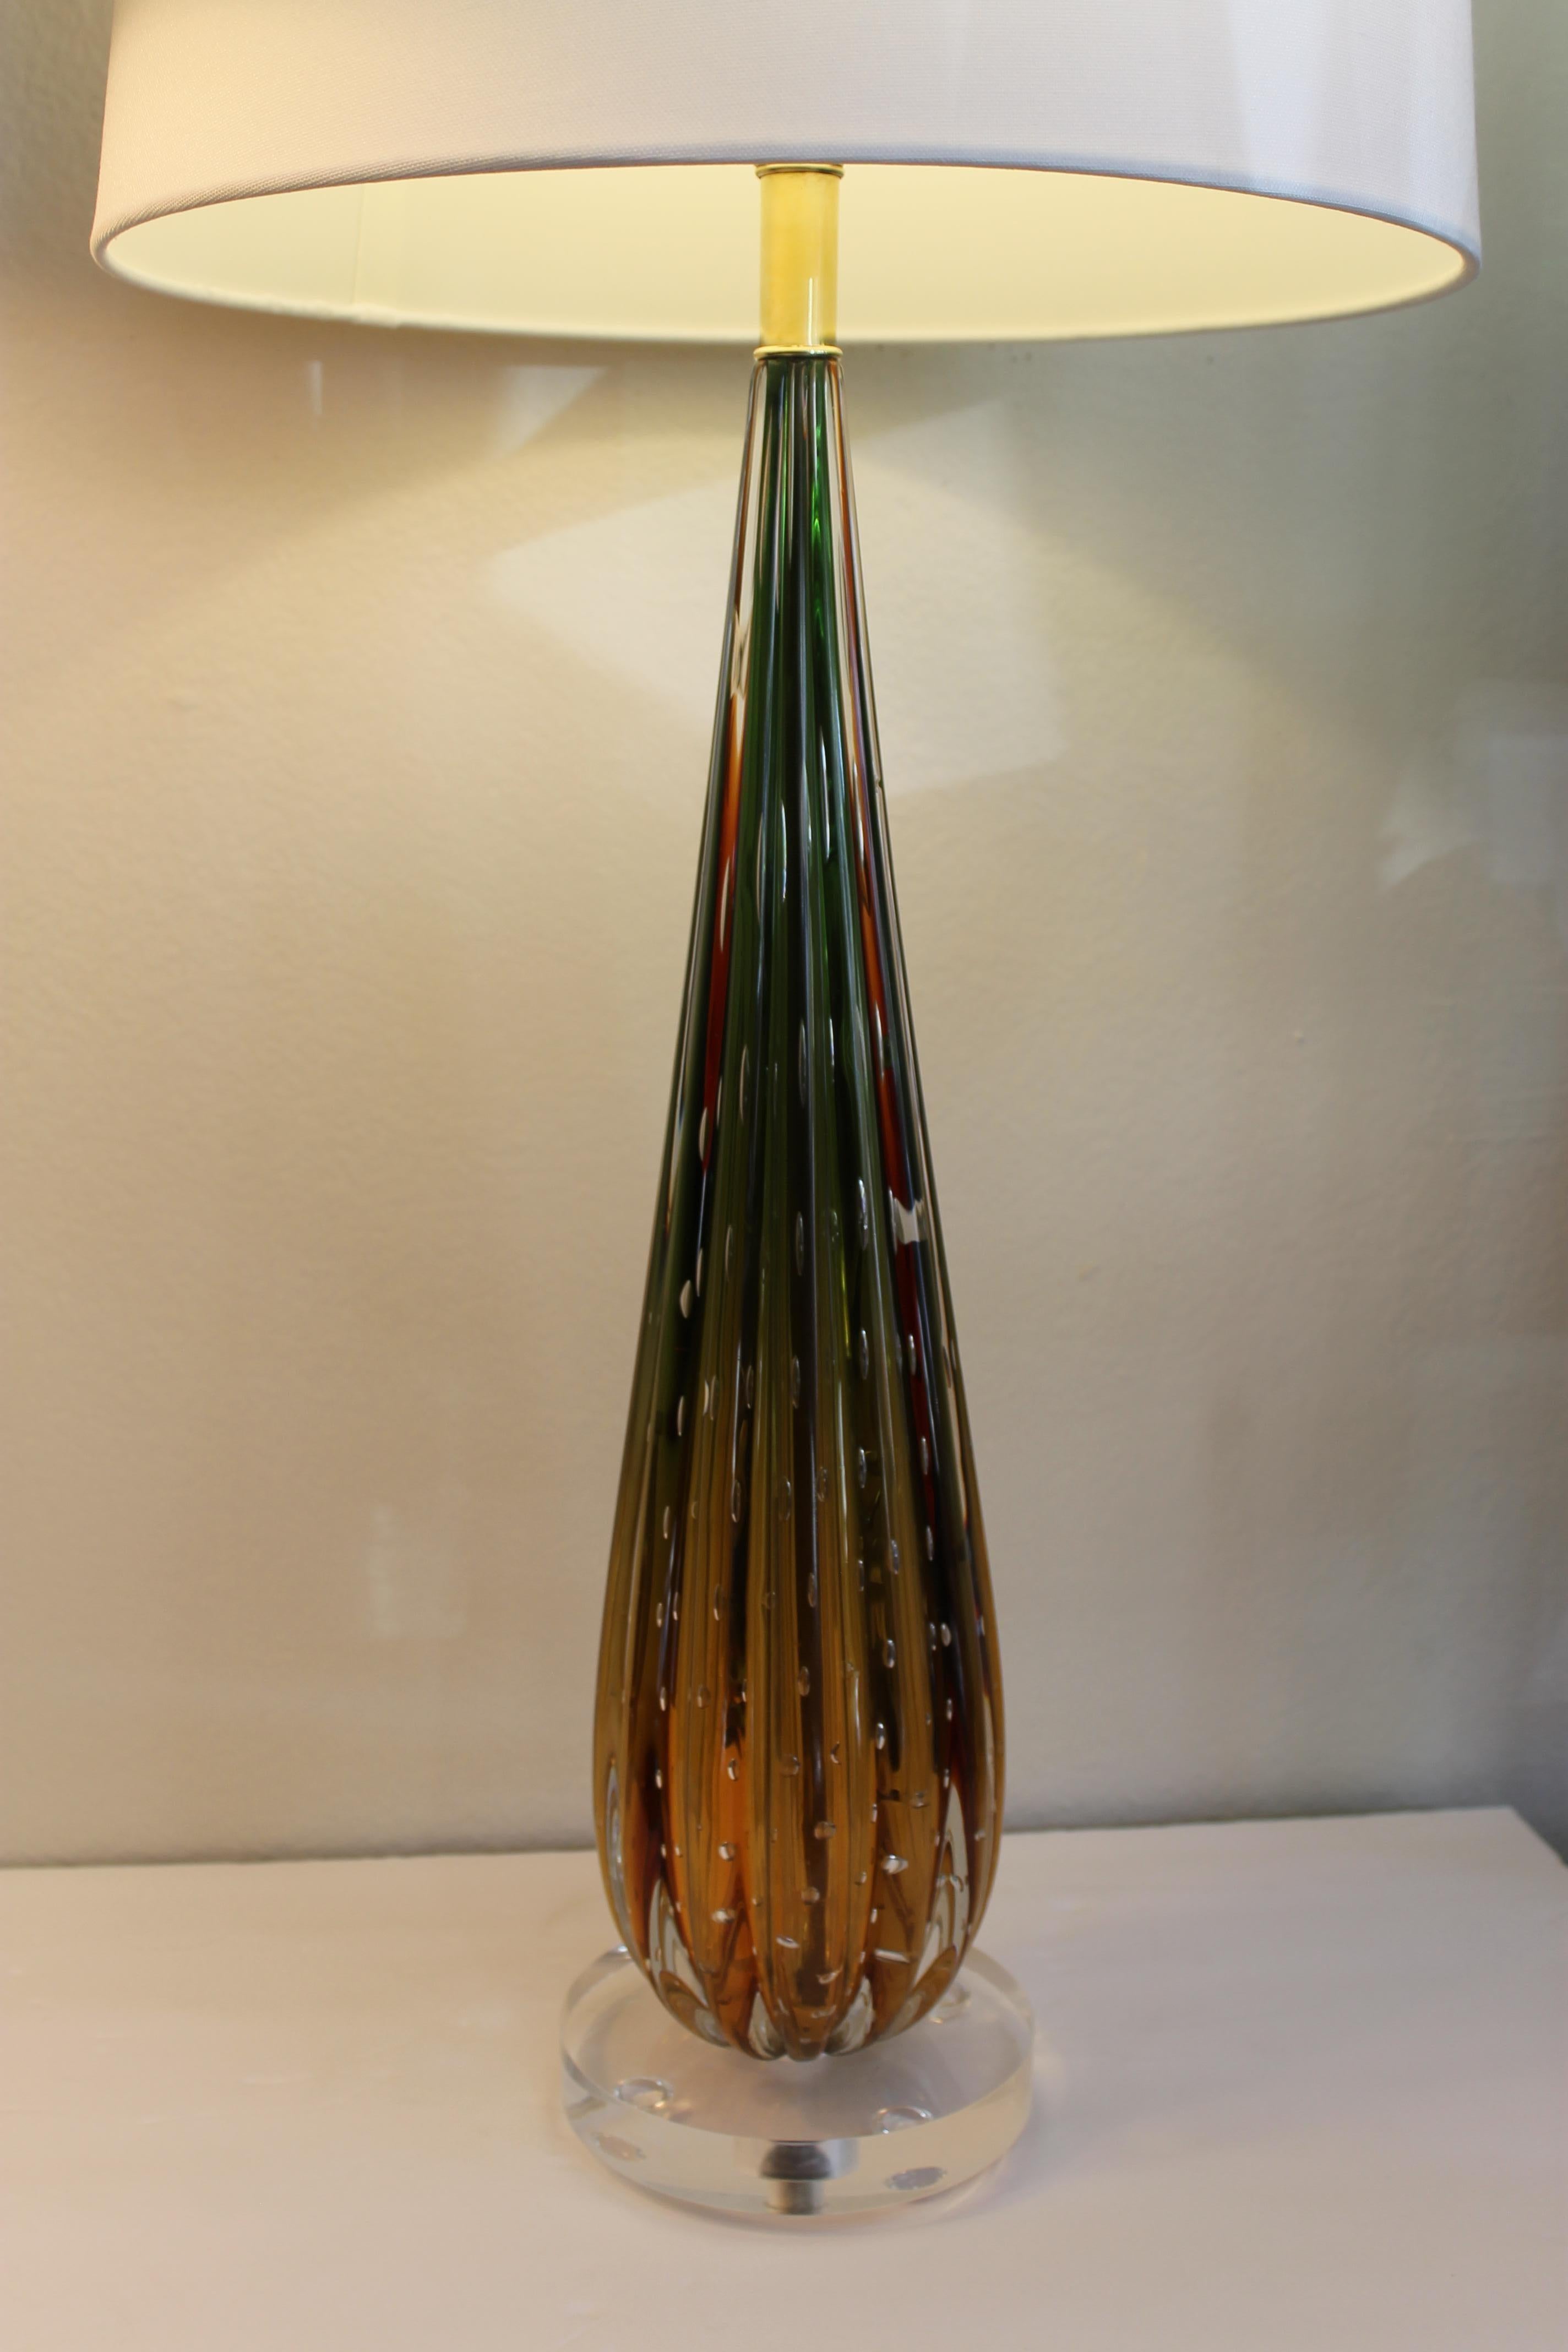 Murano amber and green glass lamp. Glass portion is 20